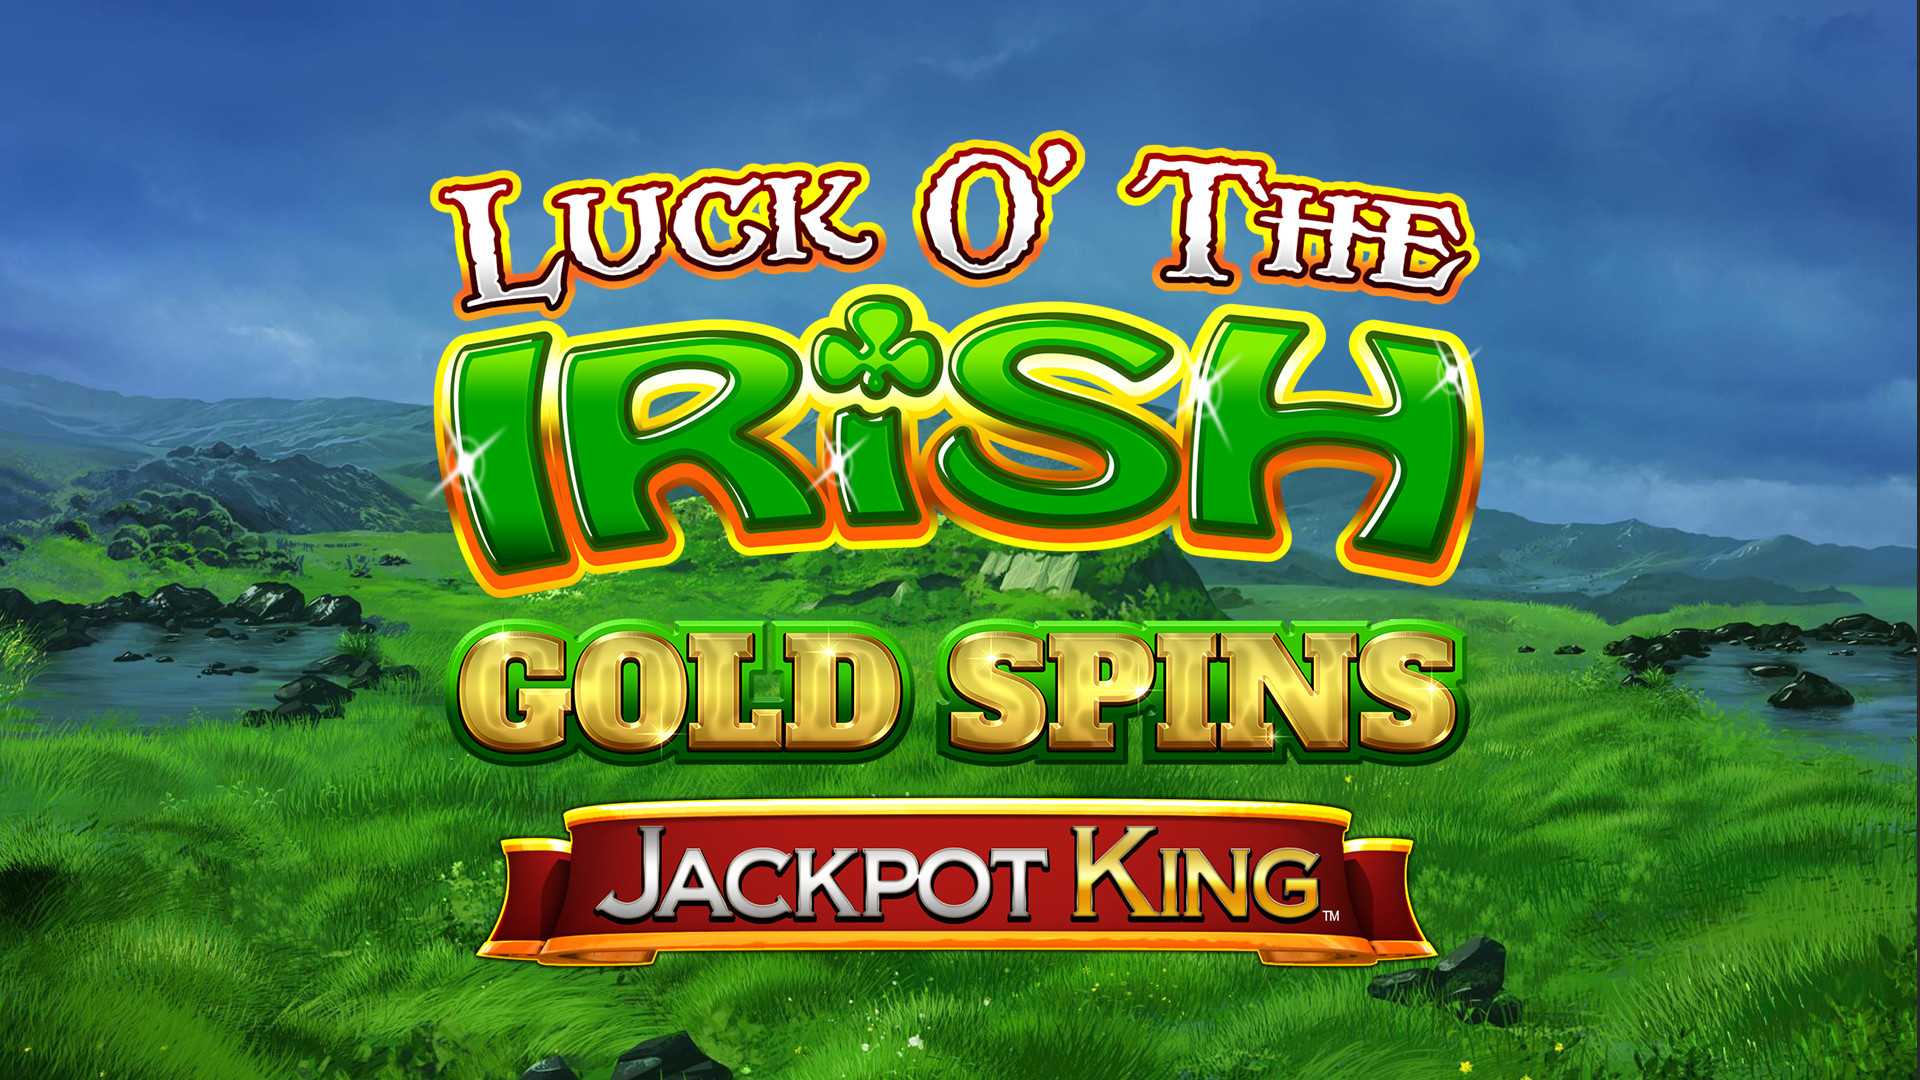 Luck O' the Irish Gold Spins Fortune Play Jackpot King